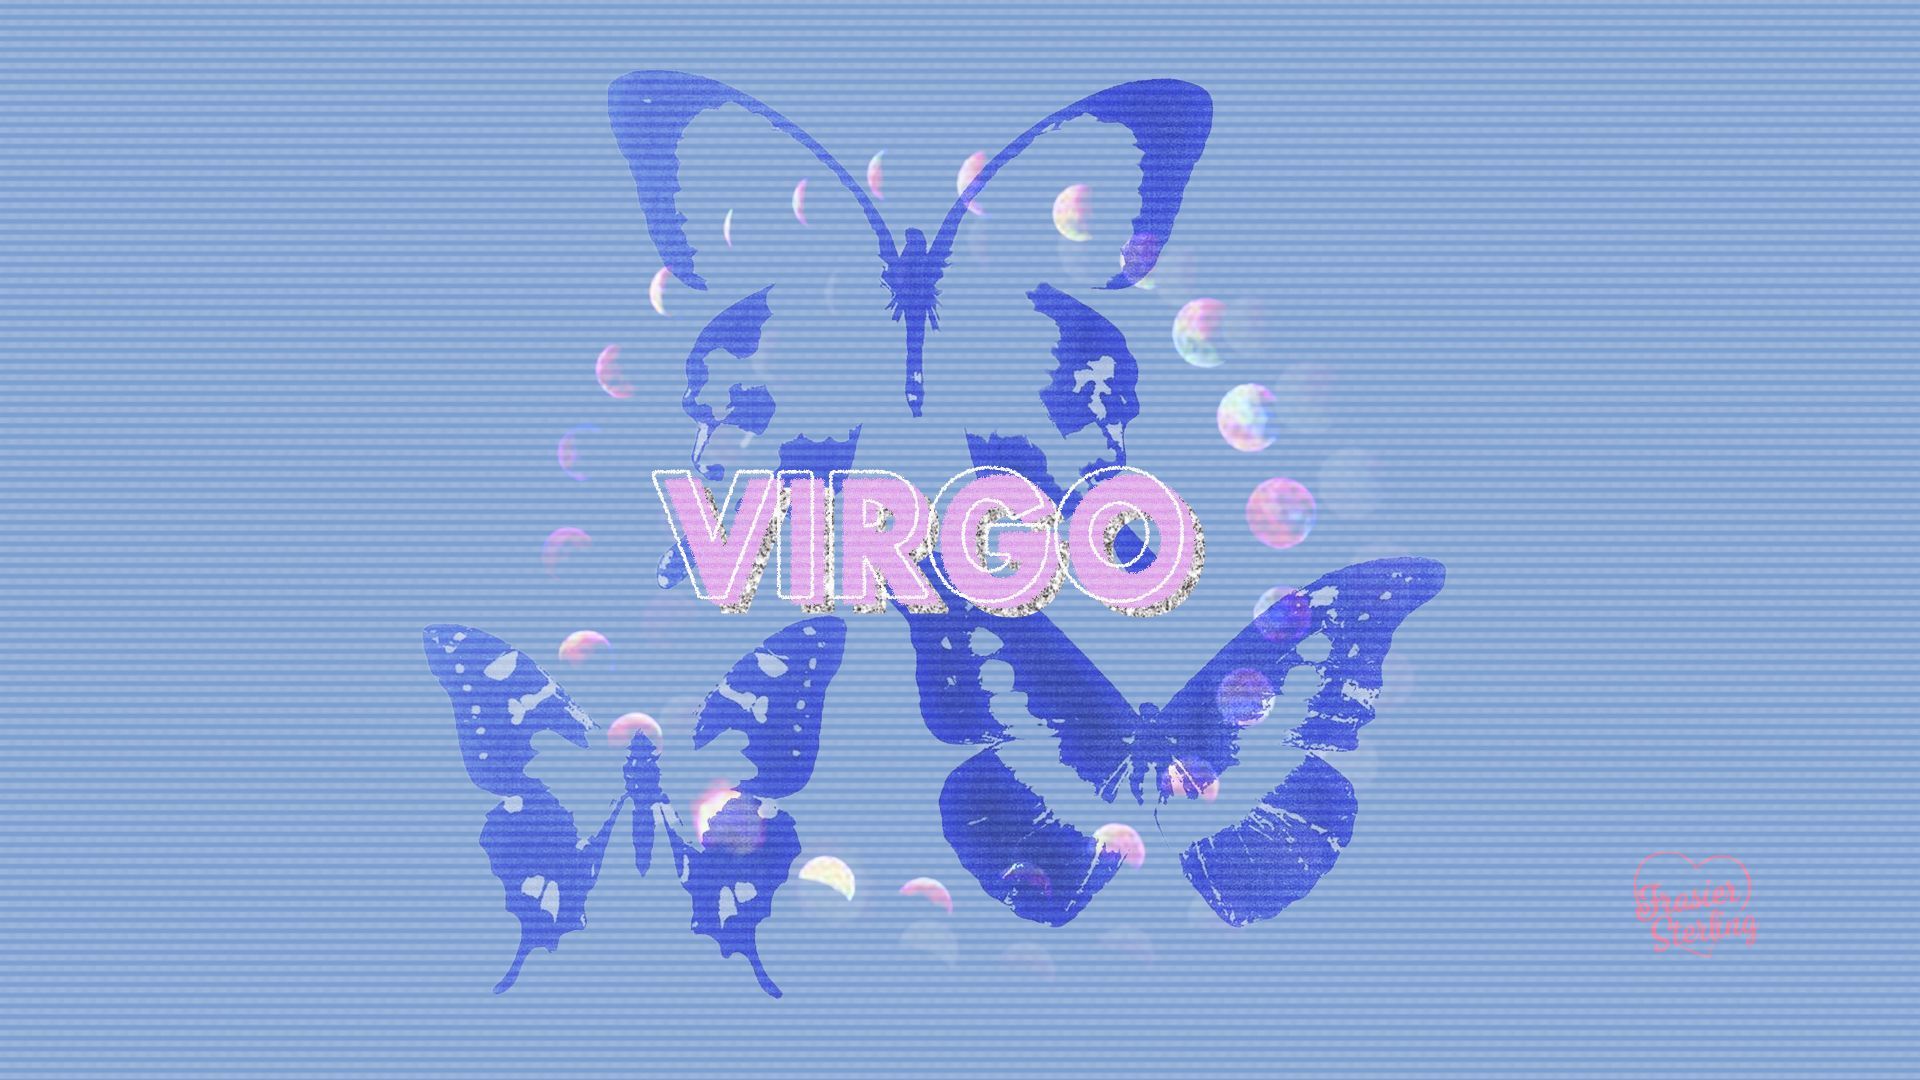 A blue screen with the word virgo on it - Virgo